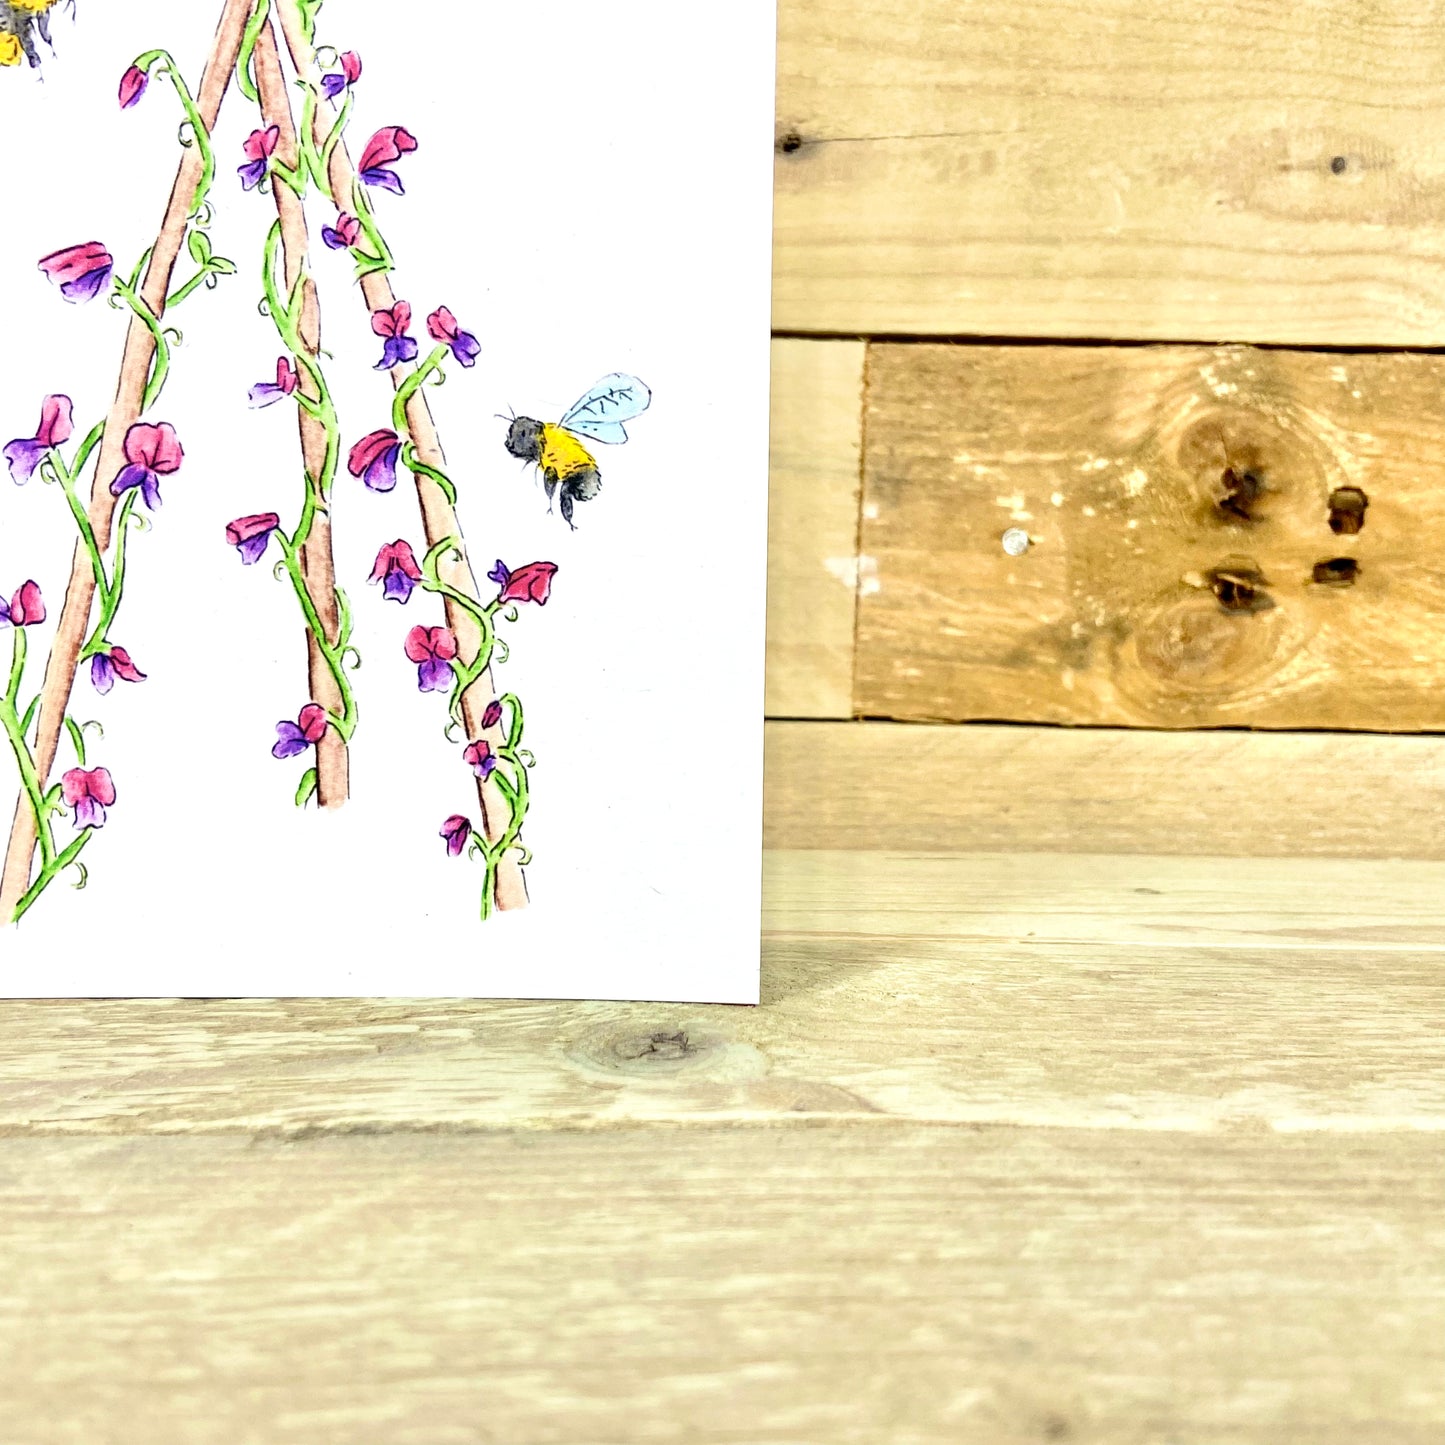 Sweetepeas and Bumble Bees Seeded Thankyou Card